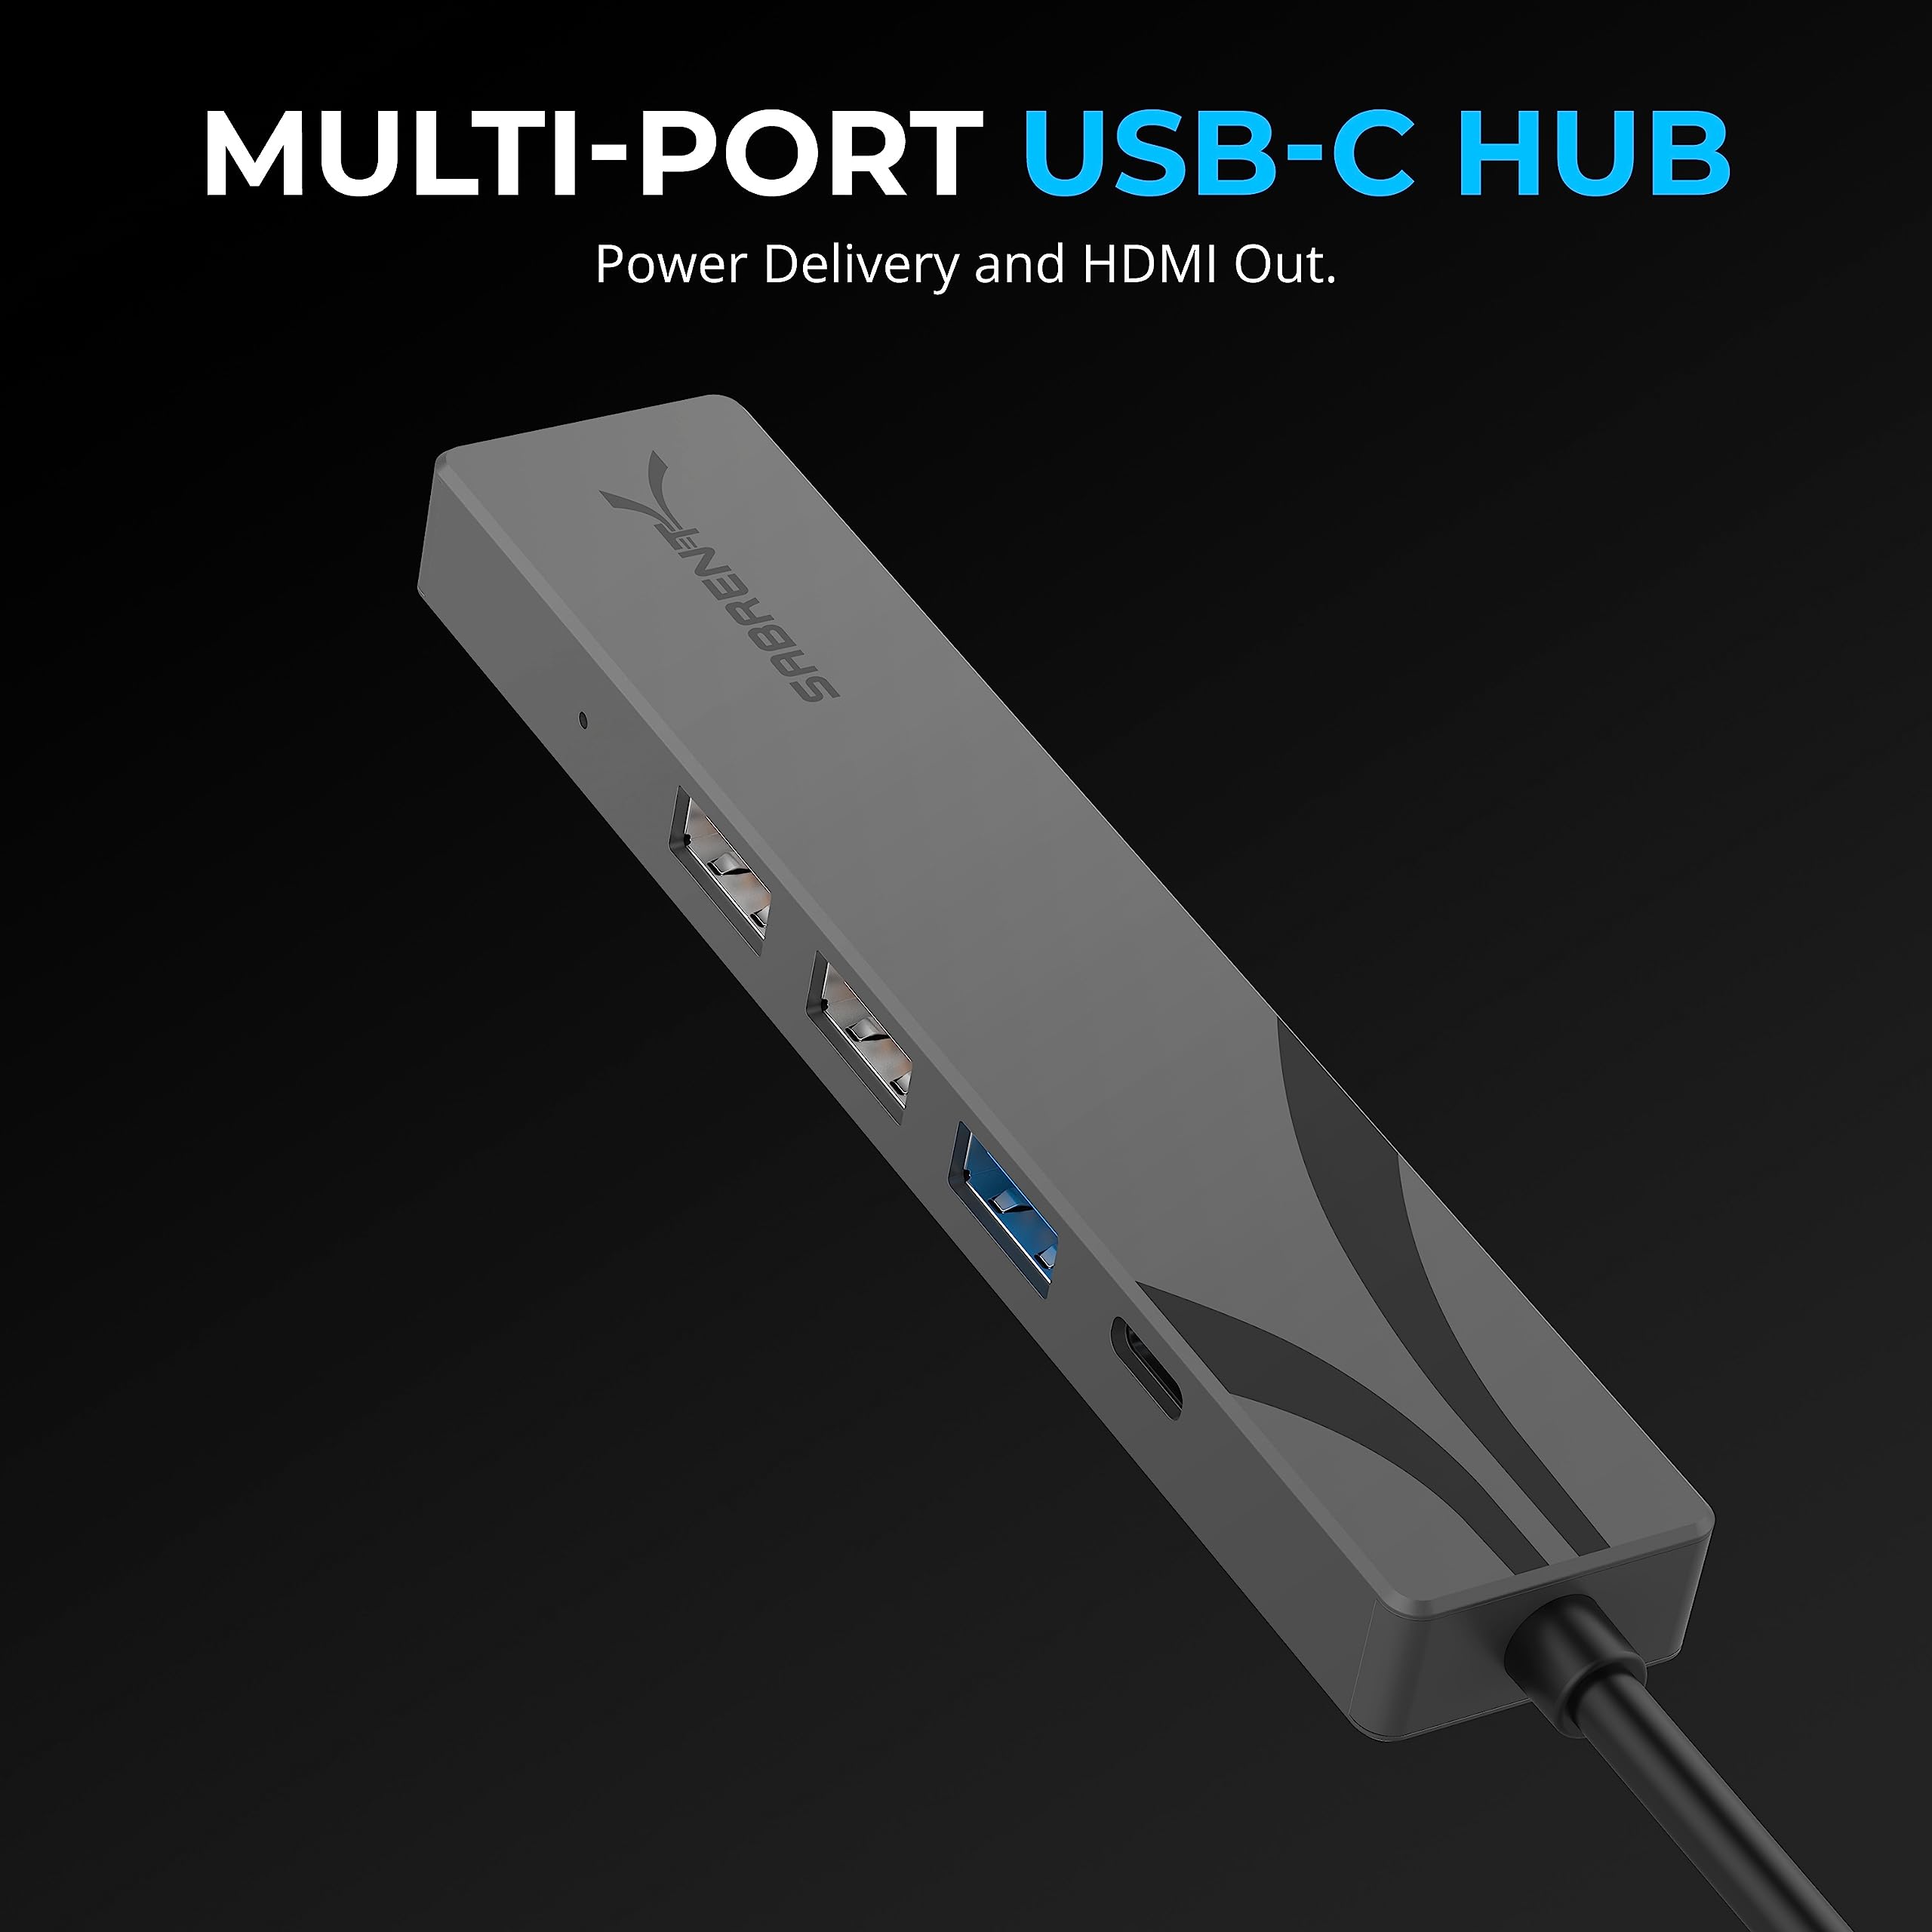 SABRENT Multi-Port USB-C Hub with Power Delivery and HDMI Out, 3 USB A Ports [HB-SHPU]